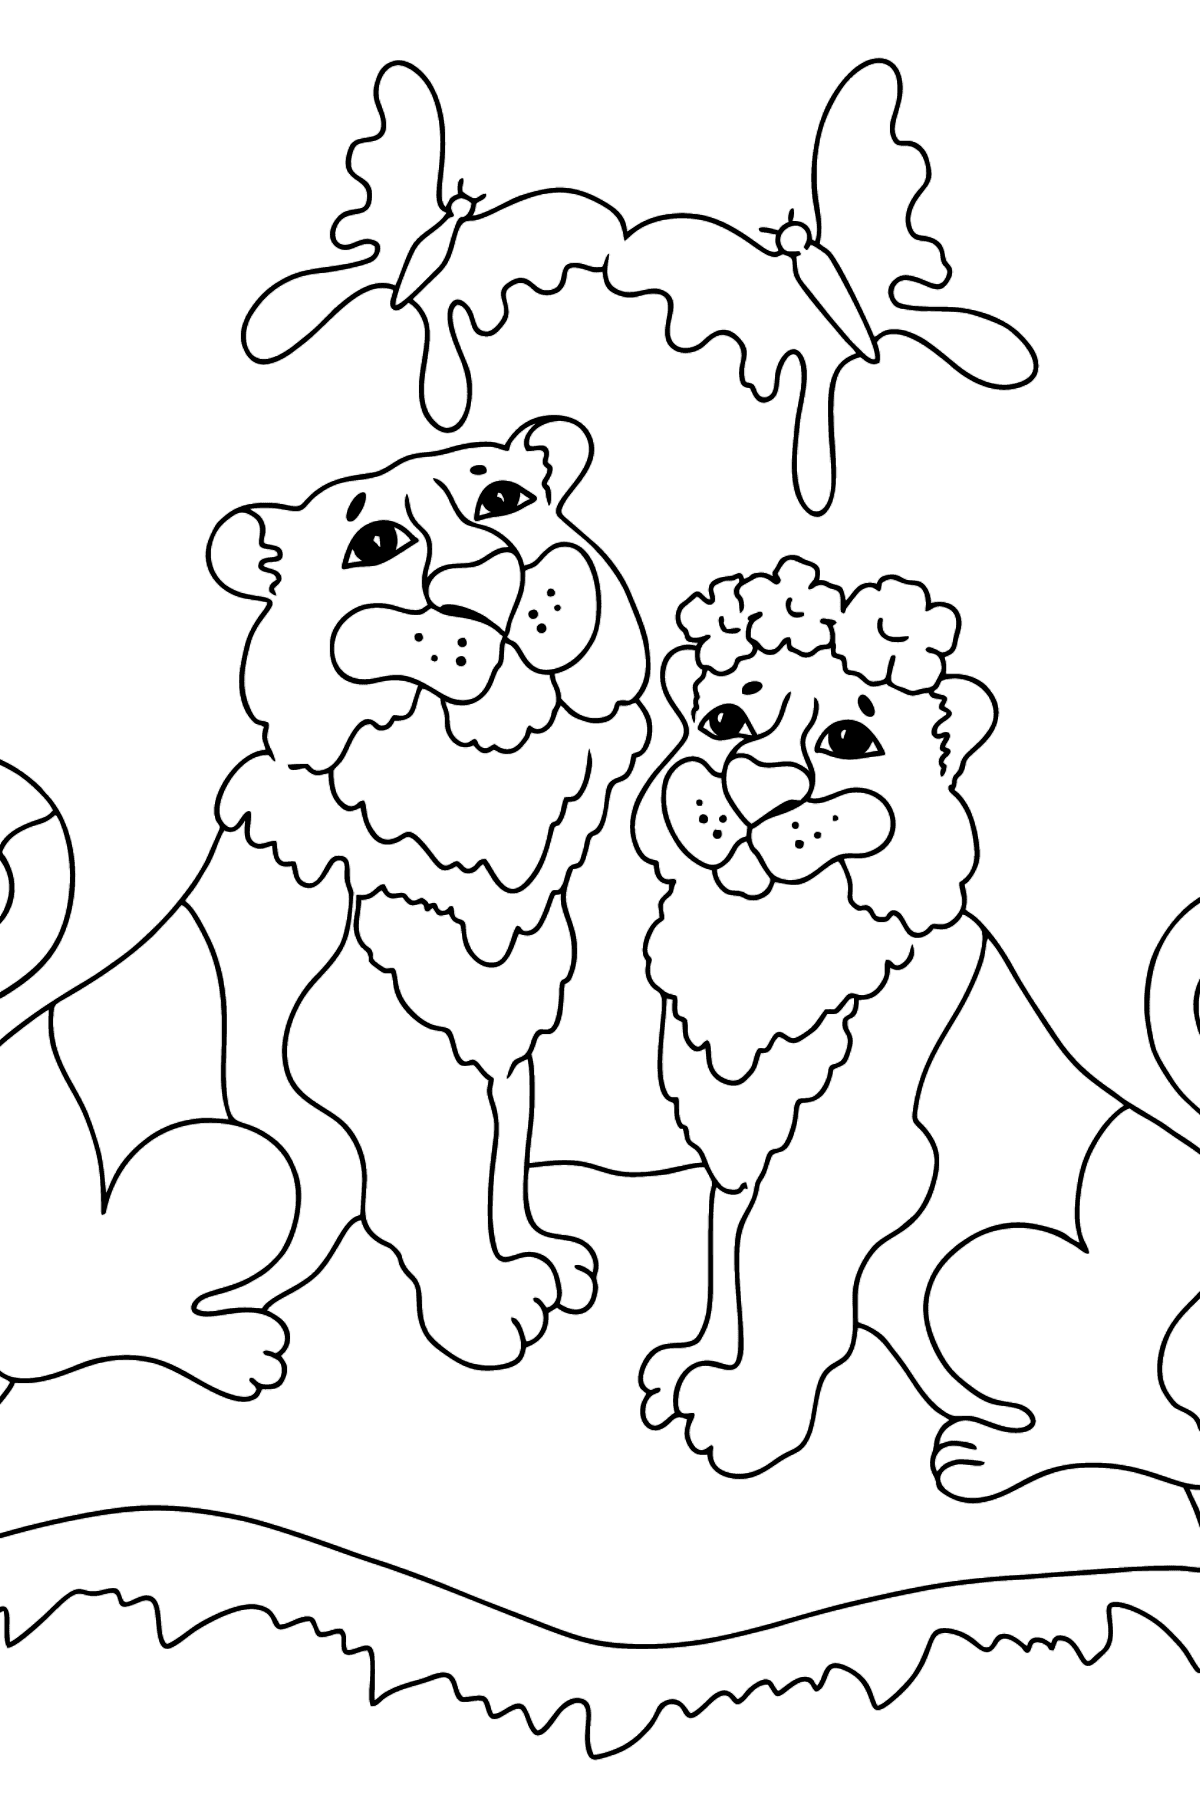 Coloring Page - Tigers with Butterflies - Coloring Pages for Kids